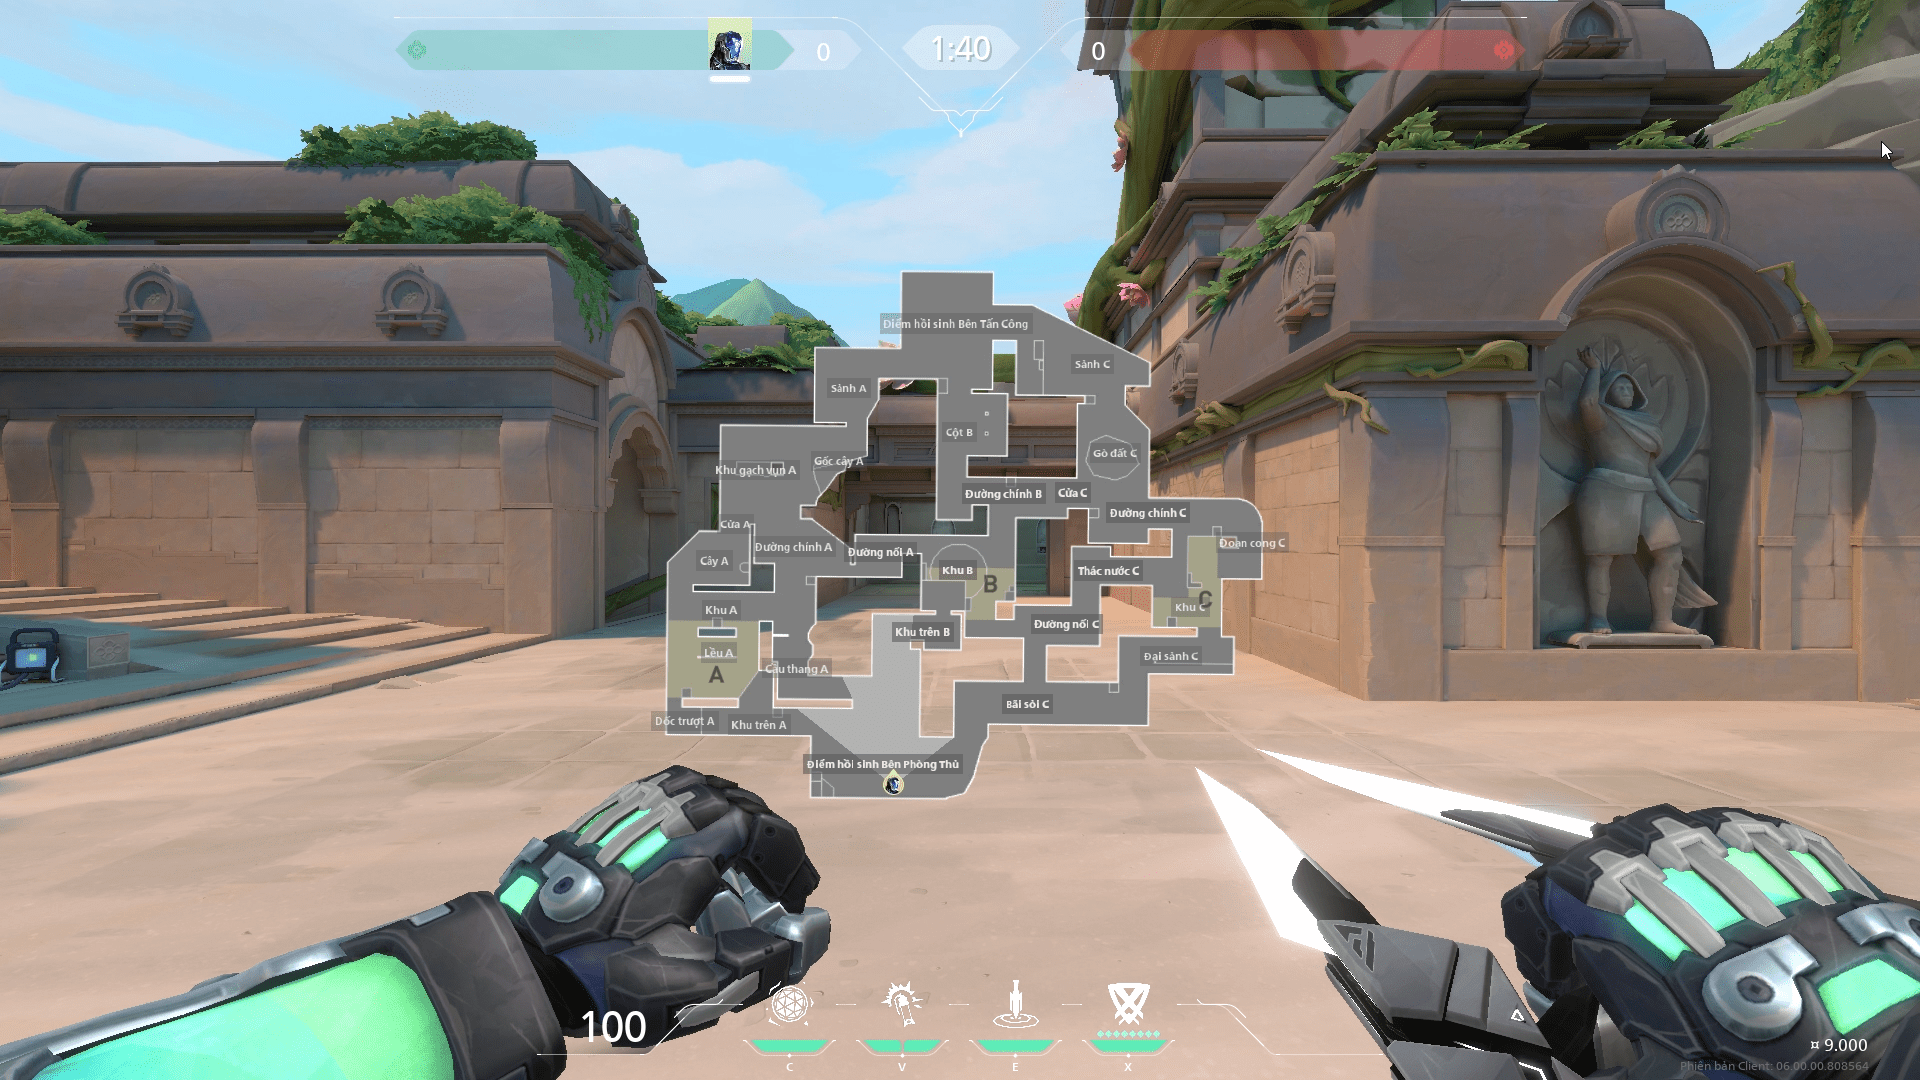 New map "Lotus" with 3 bombsites.